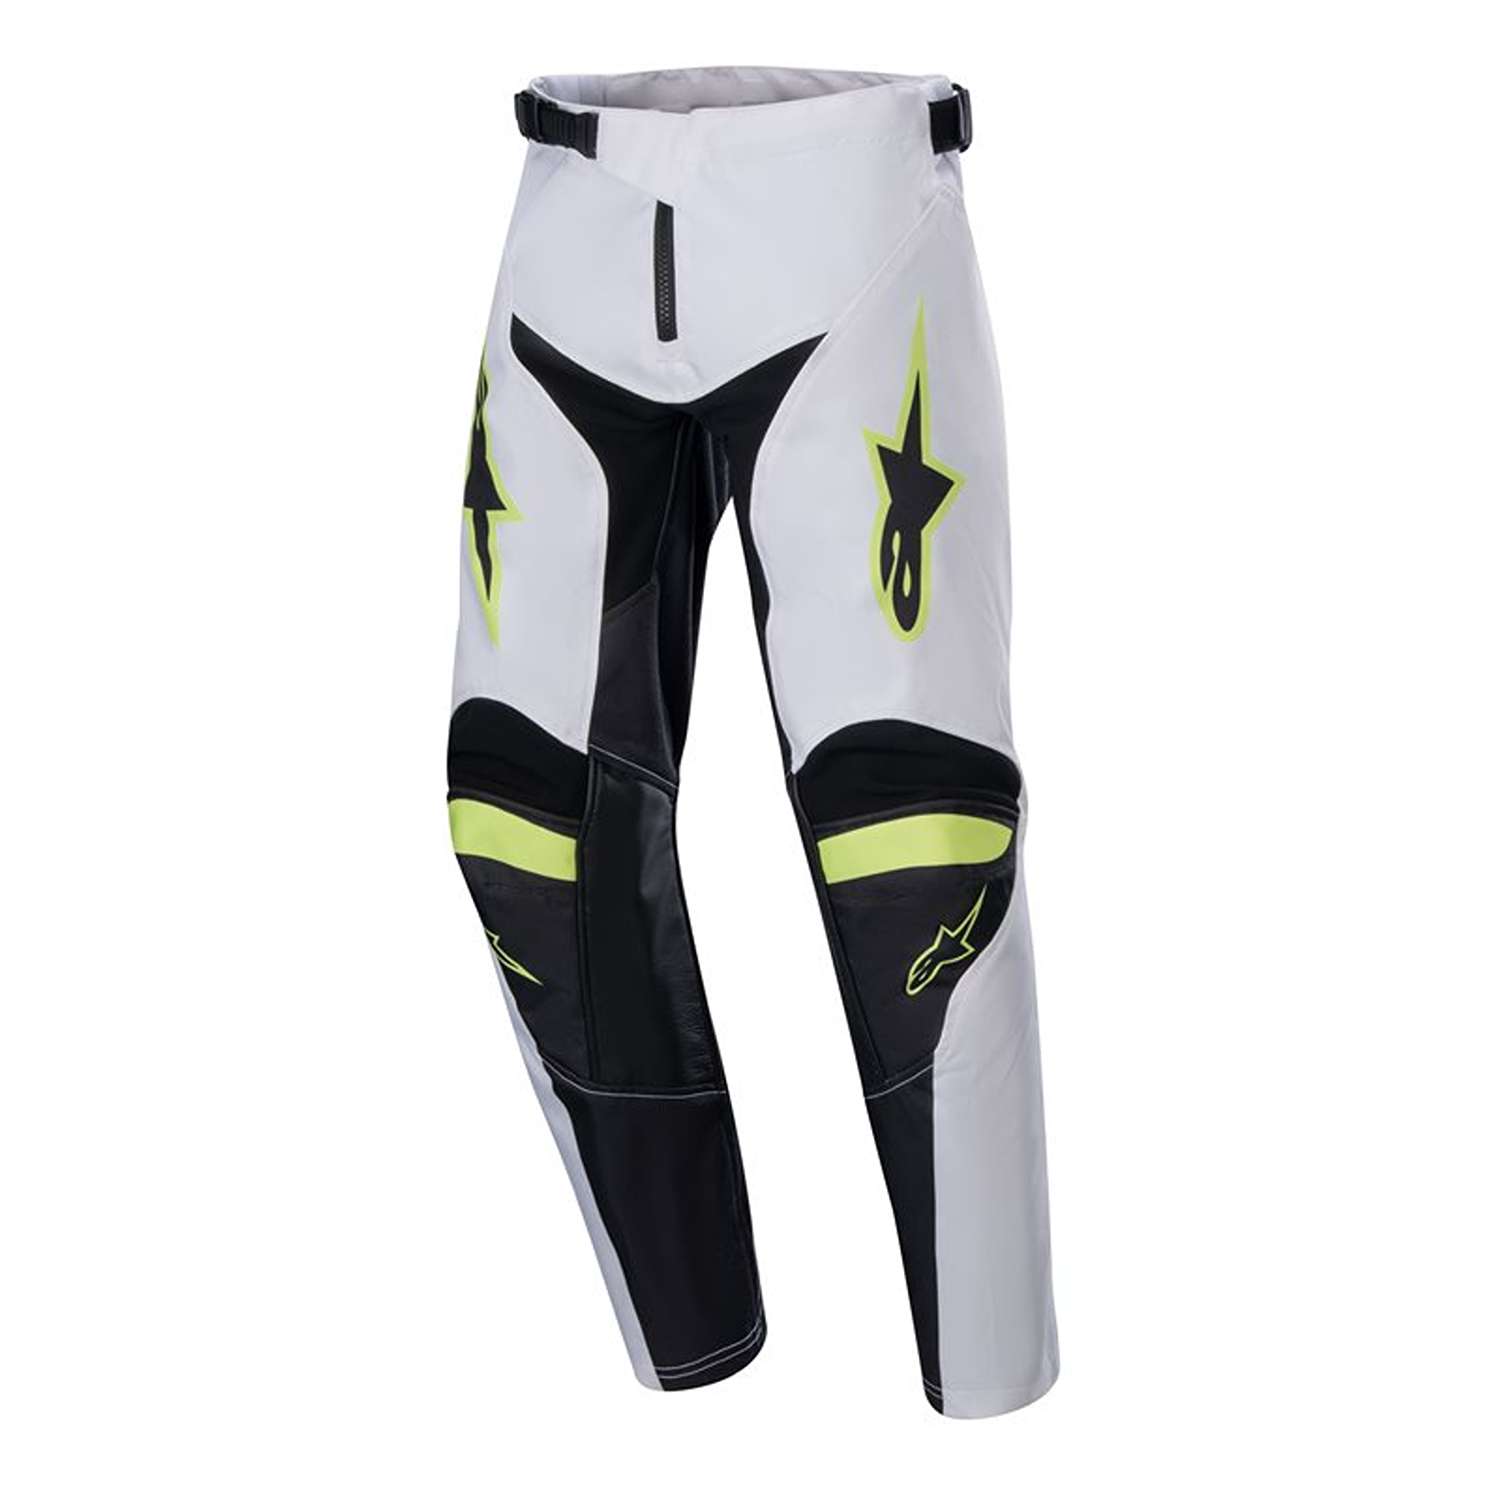 Image of Alpinestars Youth Racer Lucent Pants White Neon Red Yellow Fluo Size 24 ID 8059347267470